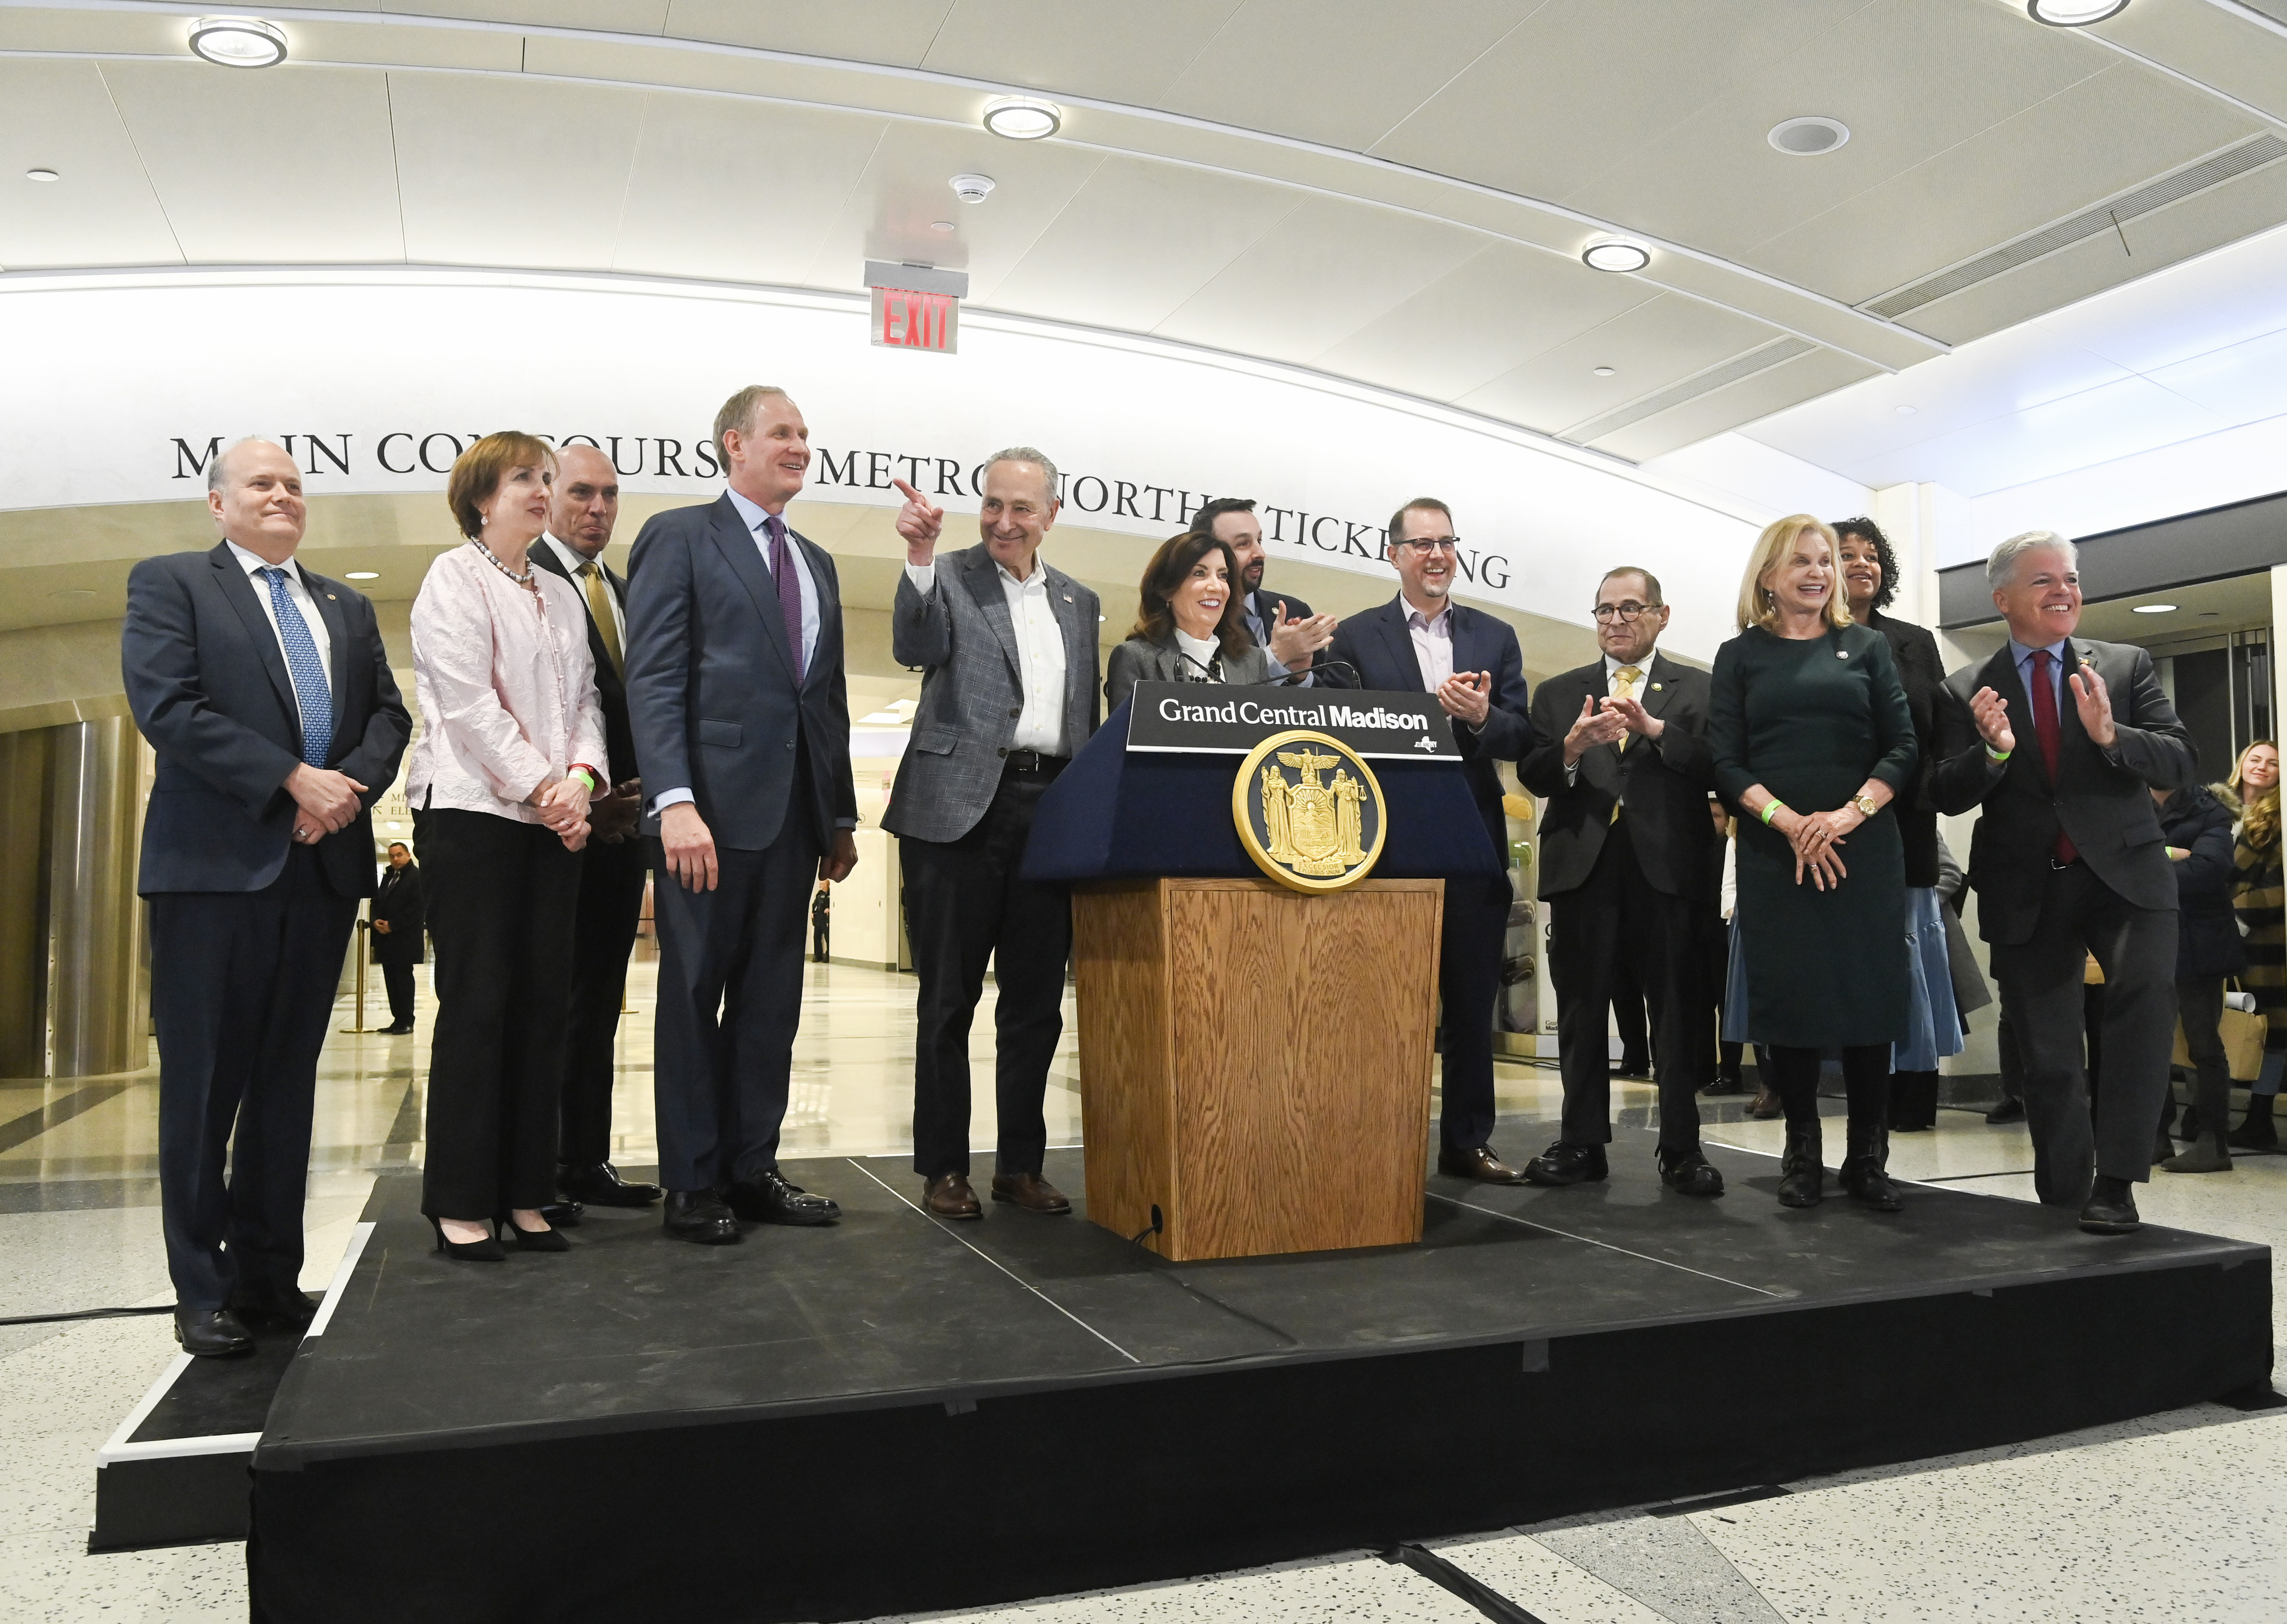 ICYMI: Governor Hochul, Senate Majority Leader Schumer, and MTA Chair and CEO Lieber Celebrate Start of Full-Scale Long Island Rail Road Service to Grand Central Madison Beginning Monday, February 27